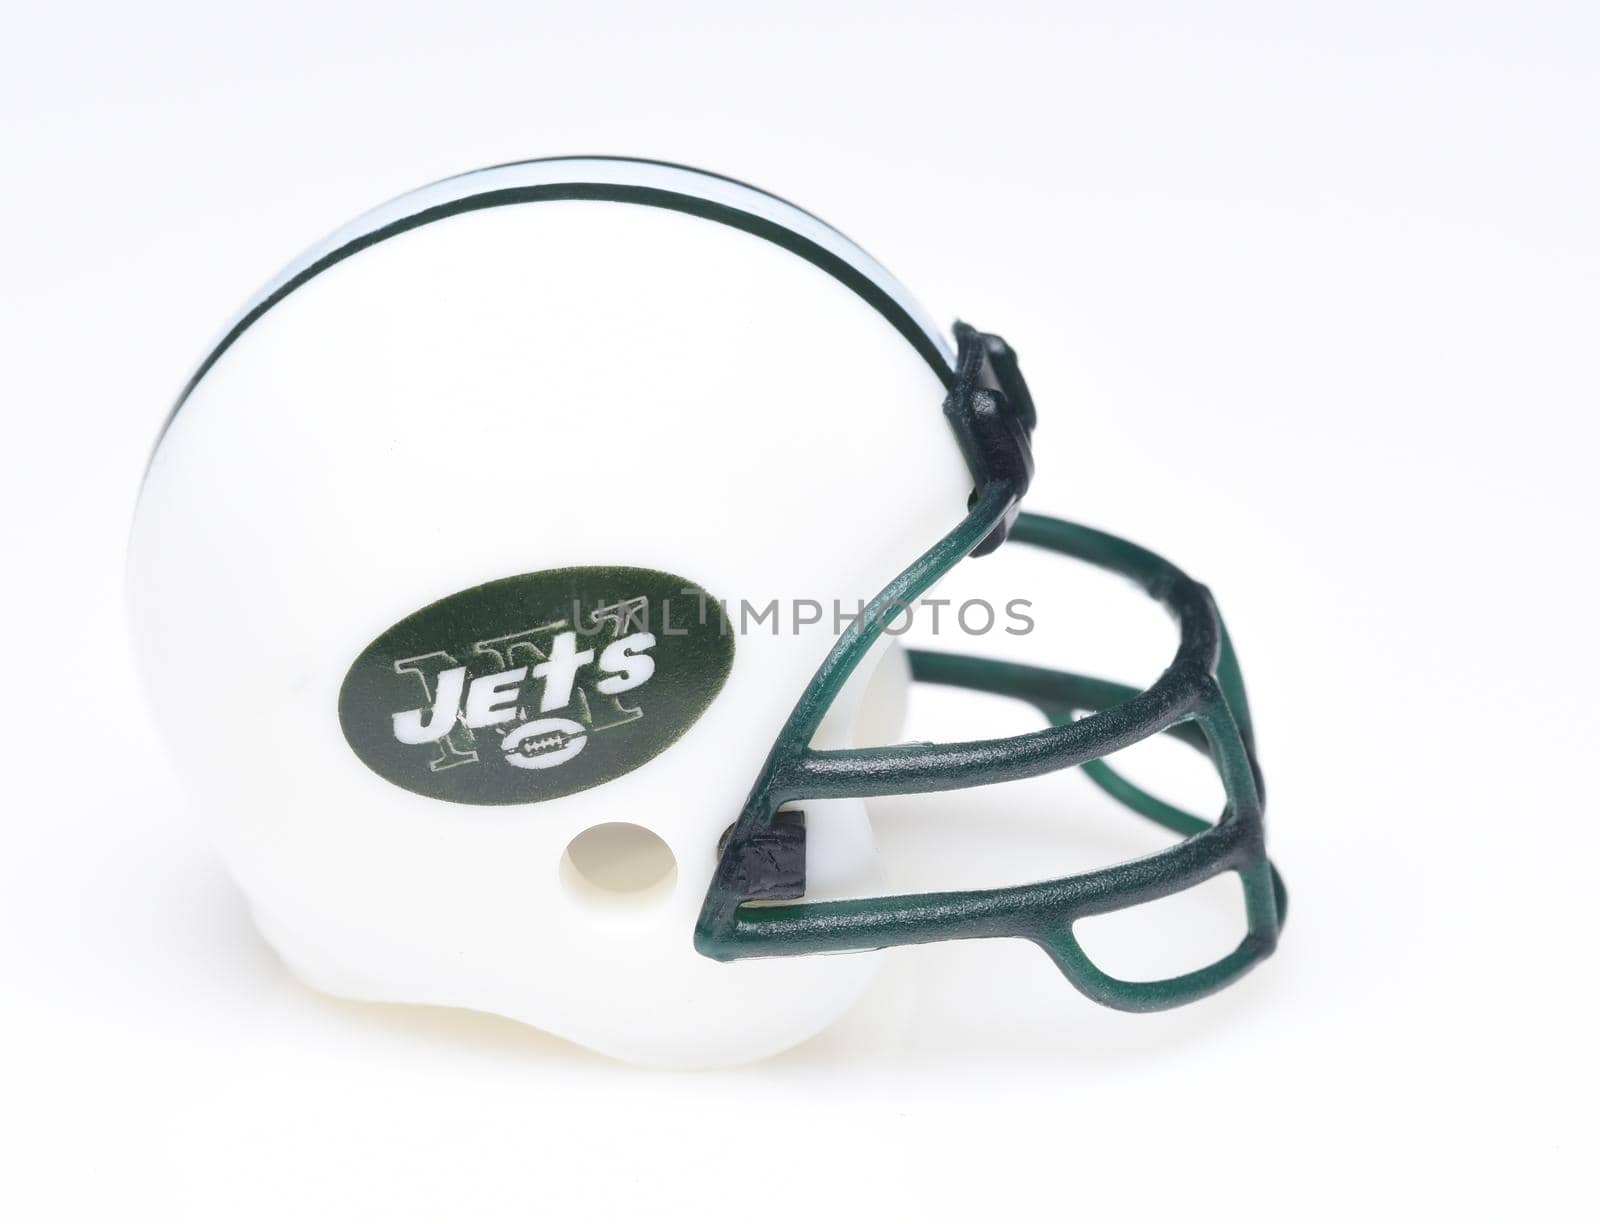 IRVINE, CALIFORNIA - AUGUST 30, 2018: Mini Collectable Football Helmet for the New York Jets of the American Football Conference East.